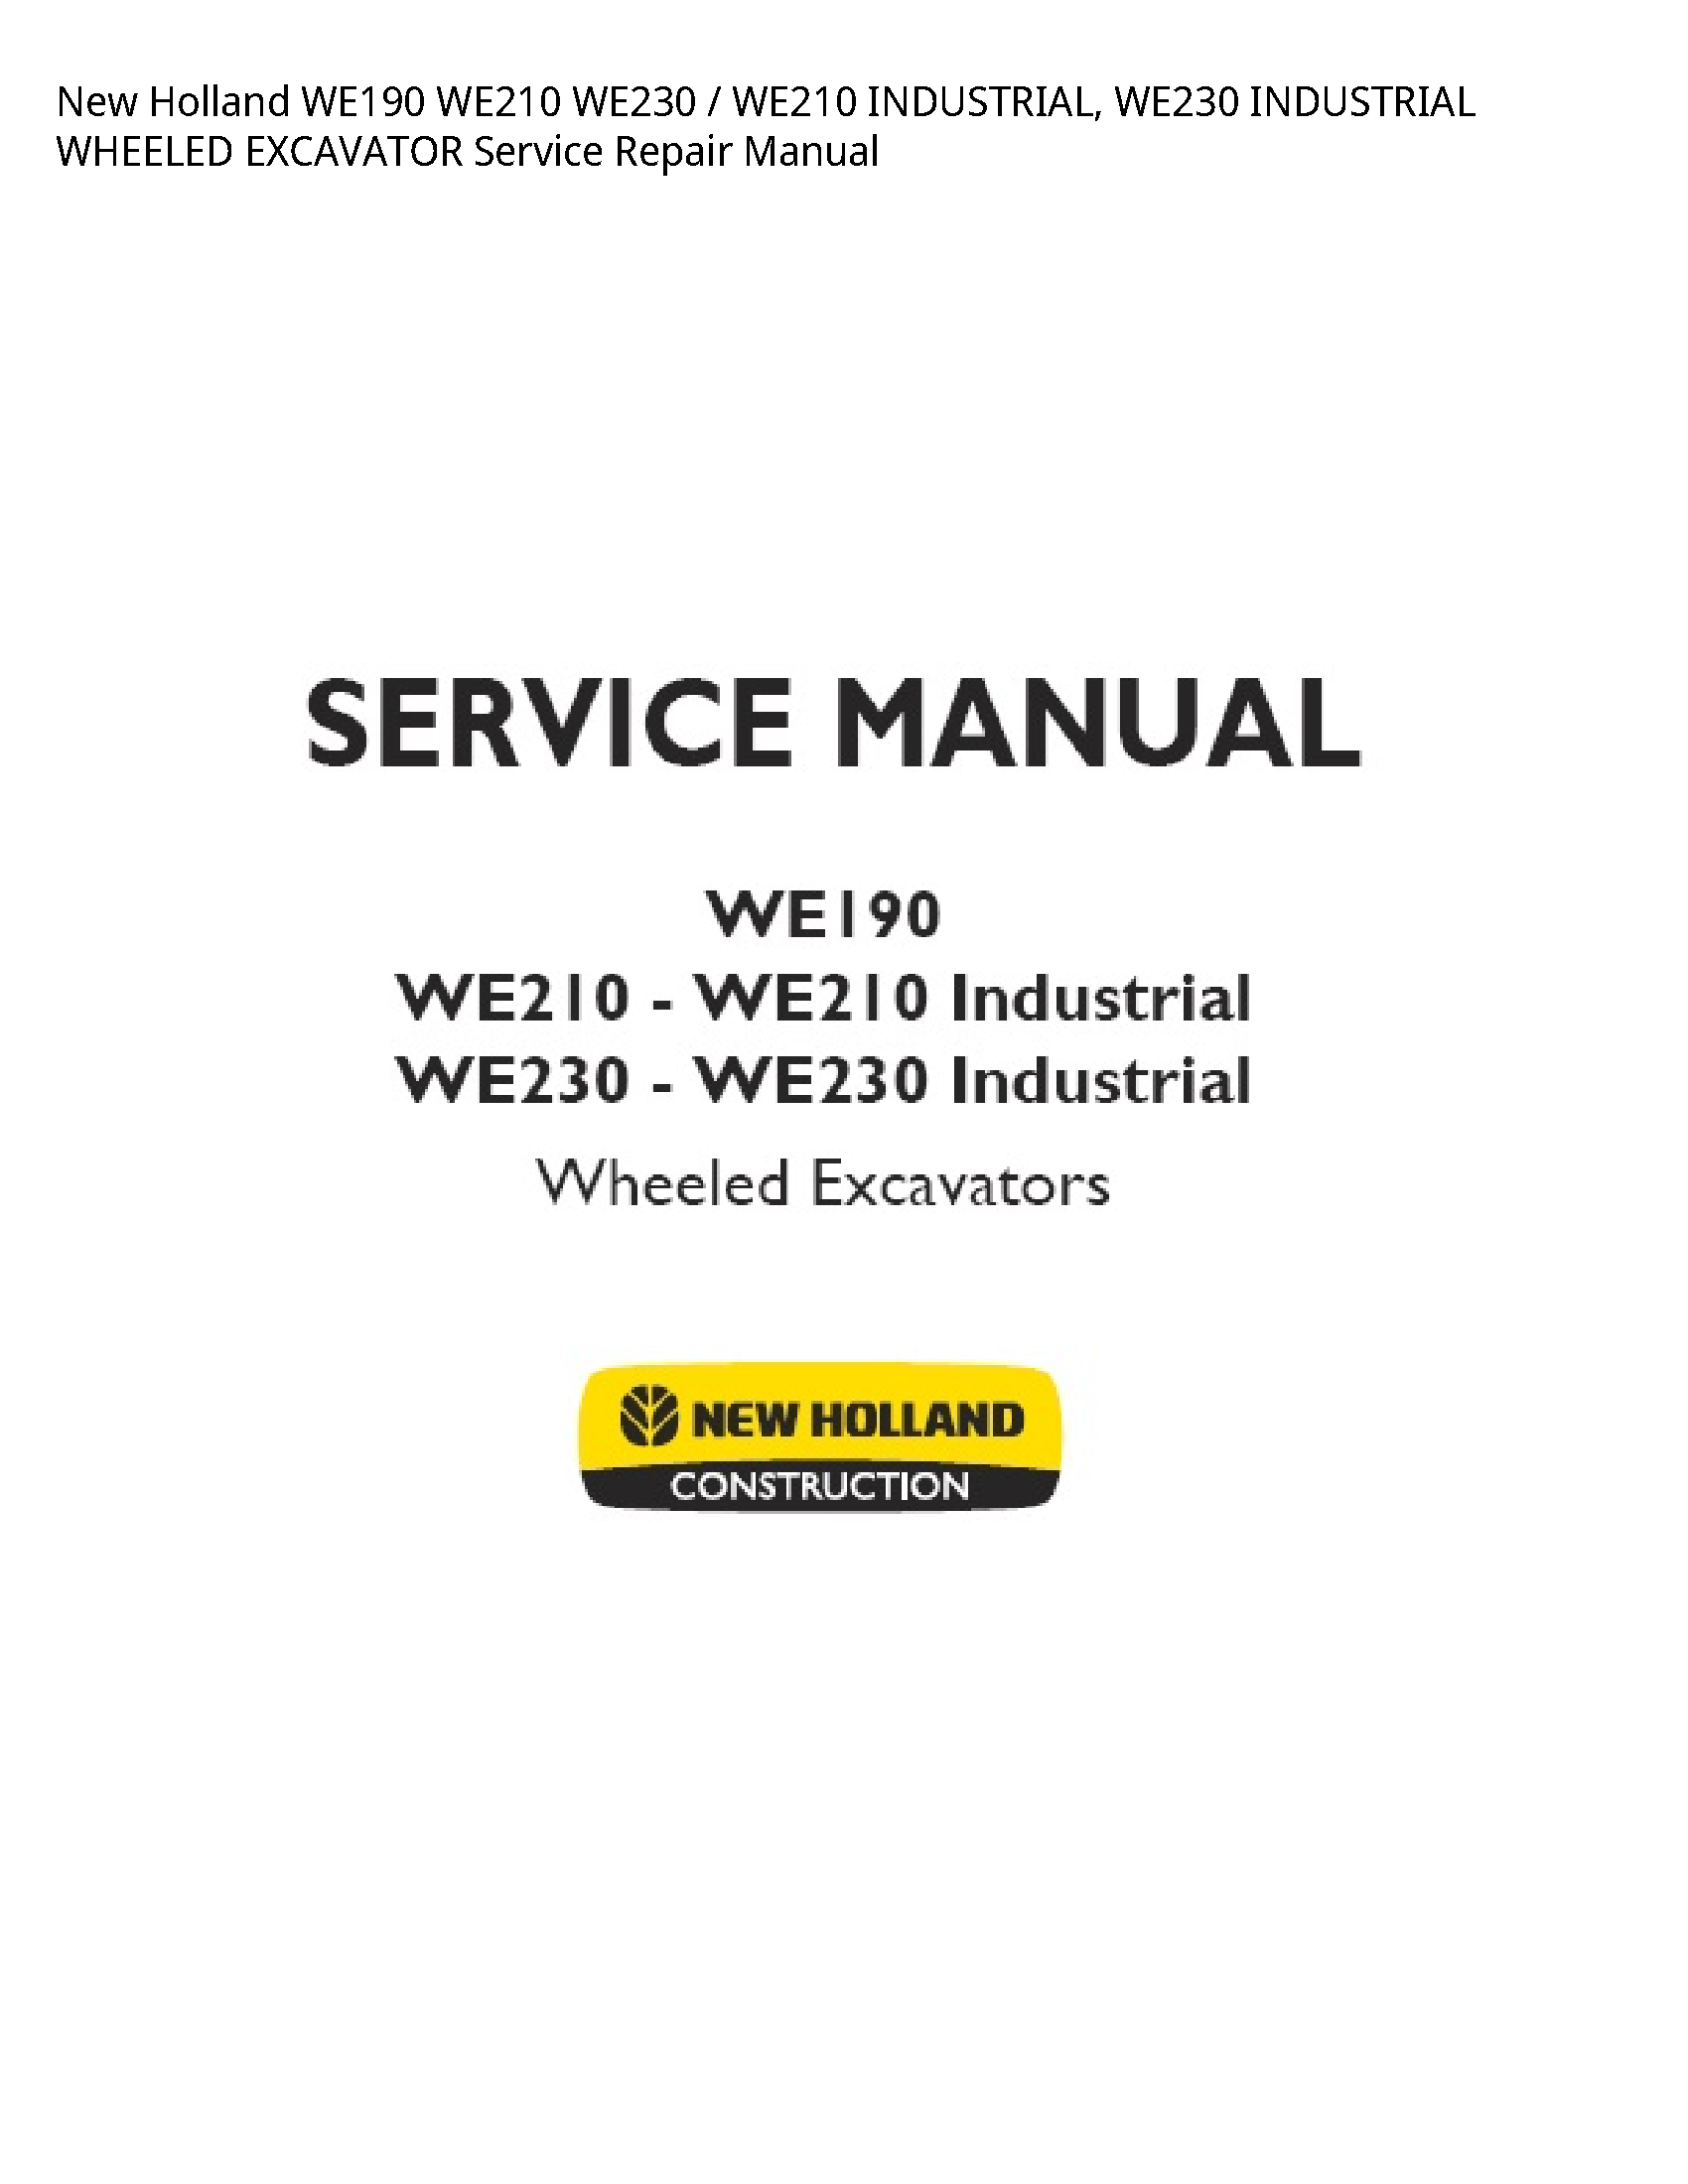 New Holland WE190 INDUSTRIAL manual